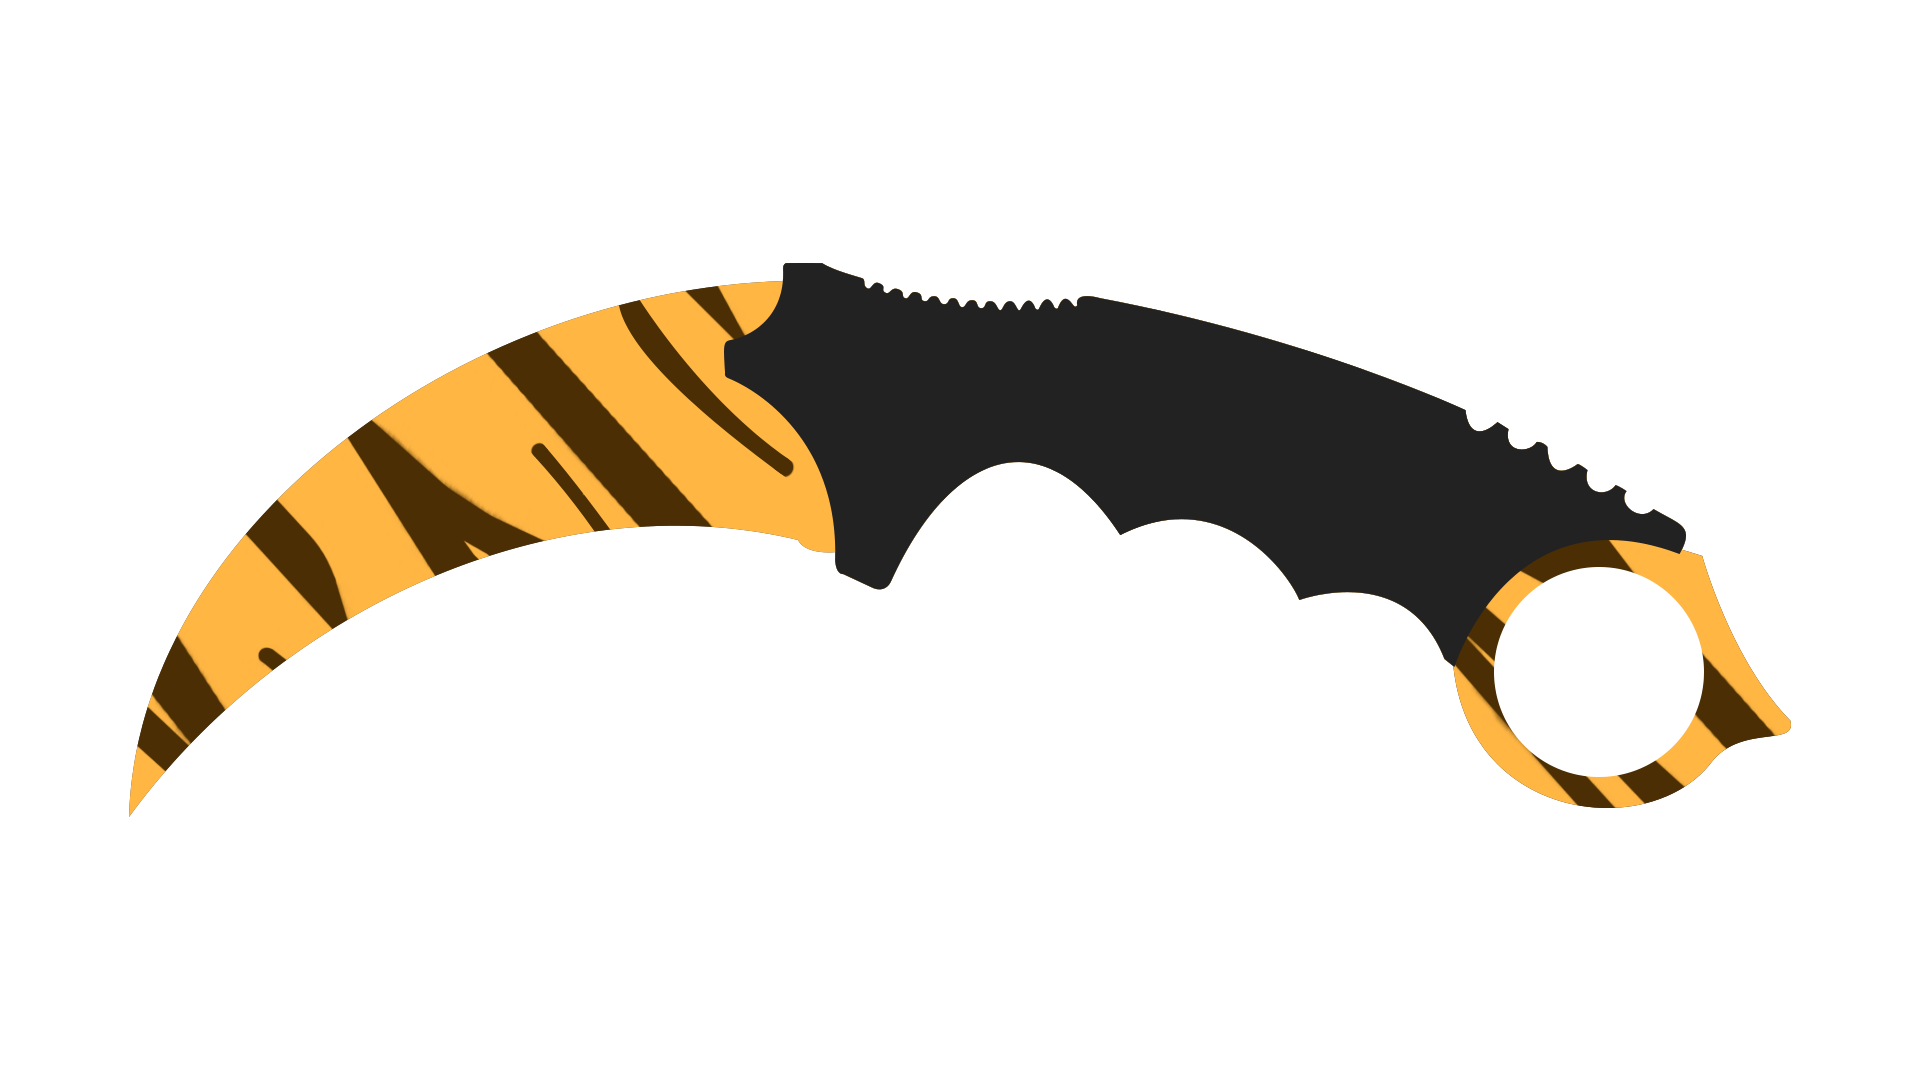 I made some minimalist karambit wallpapers for everyone.